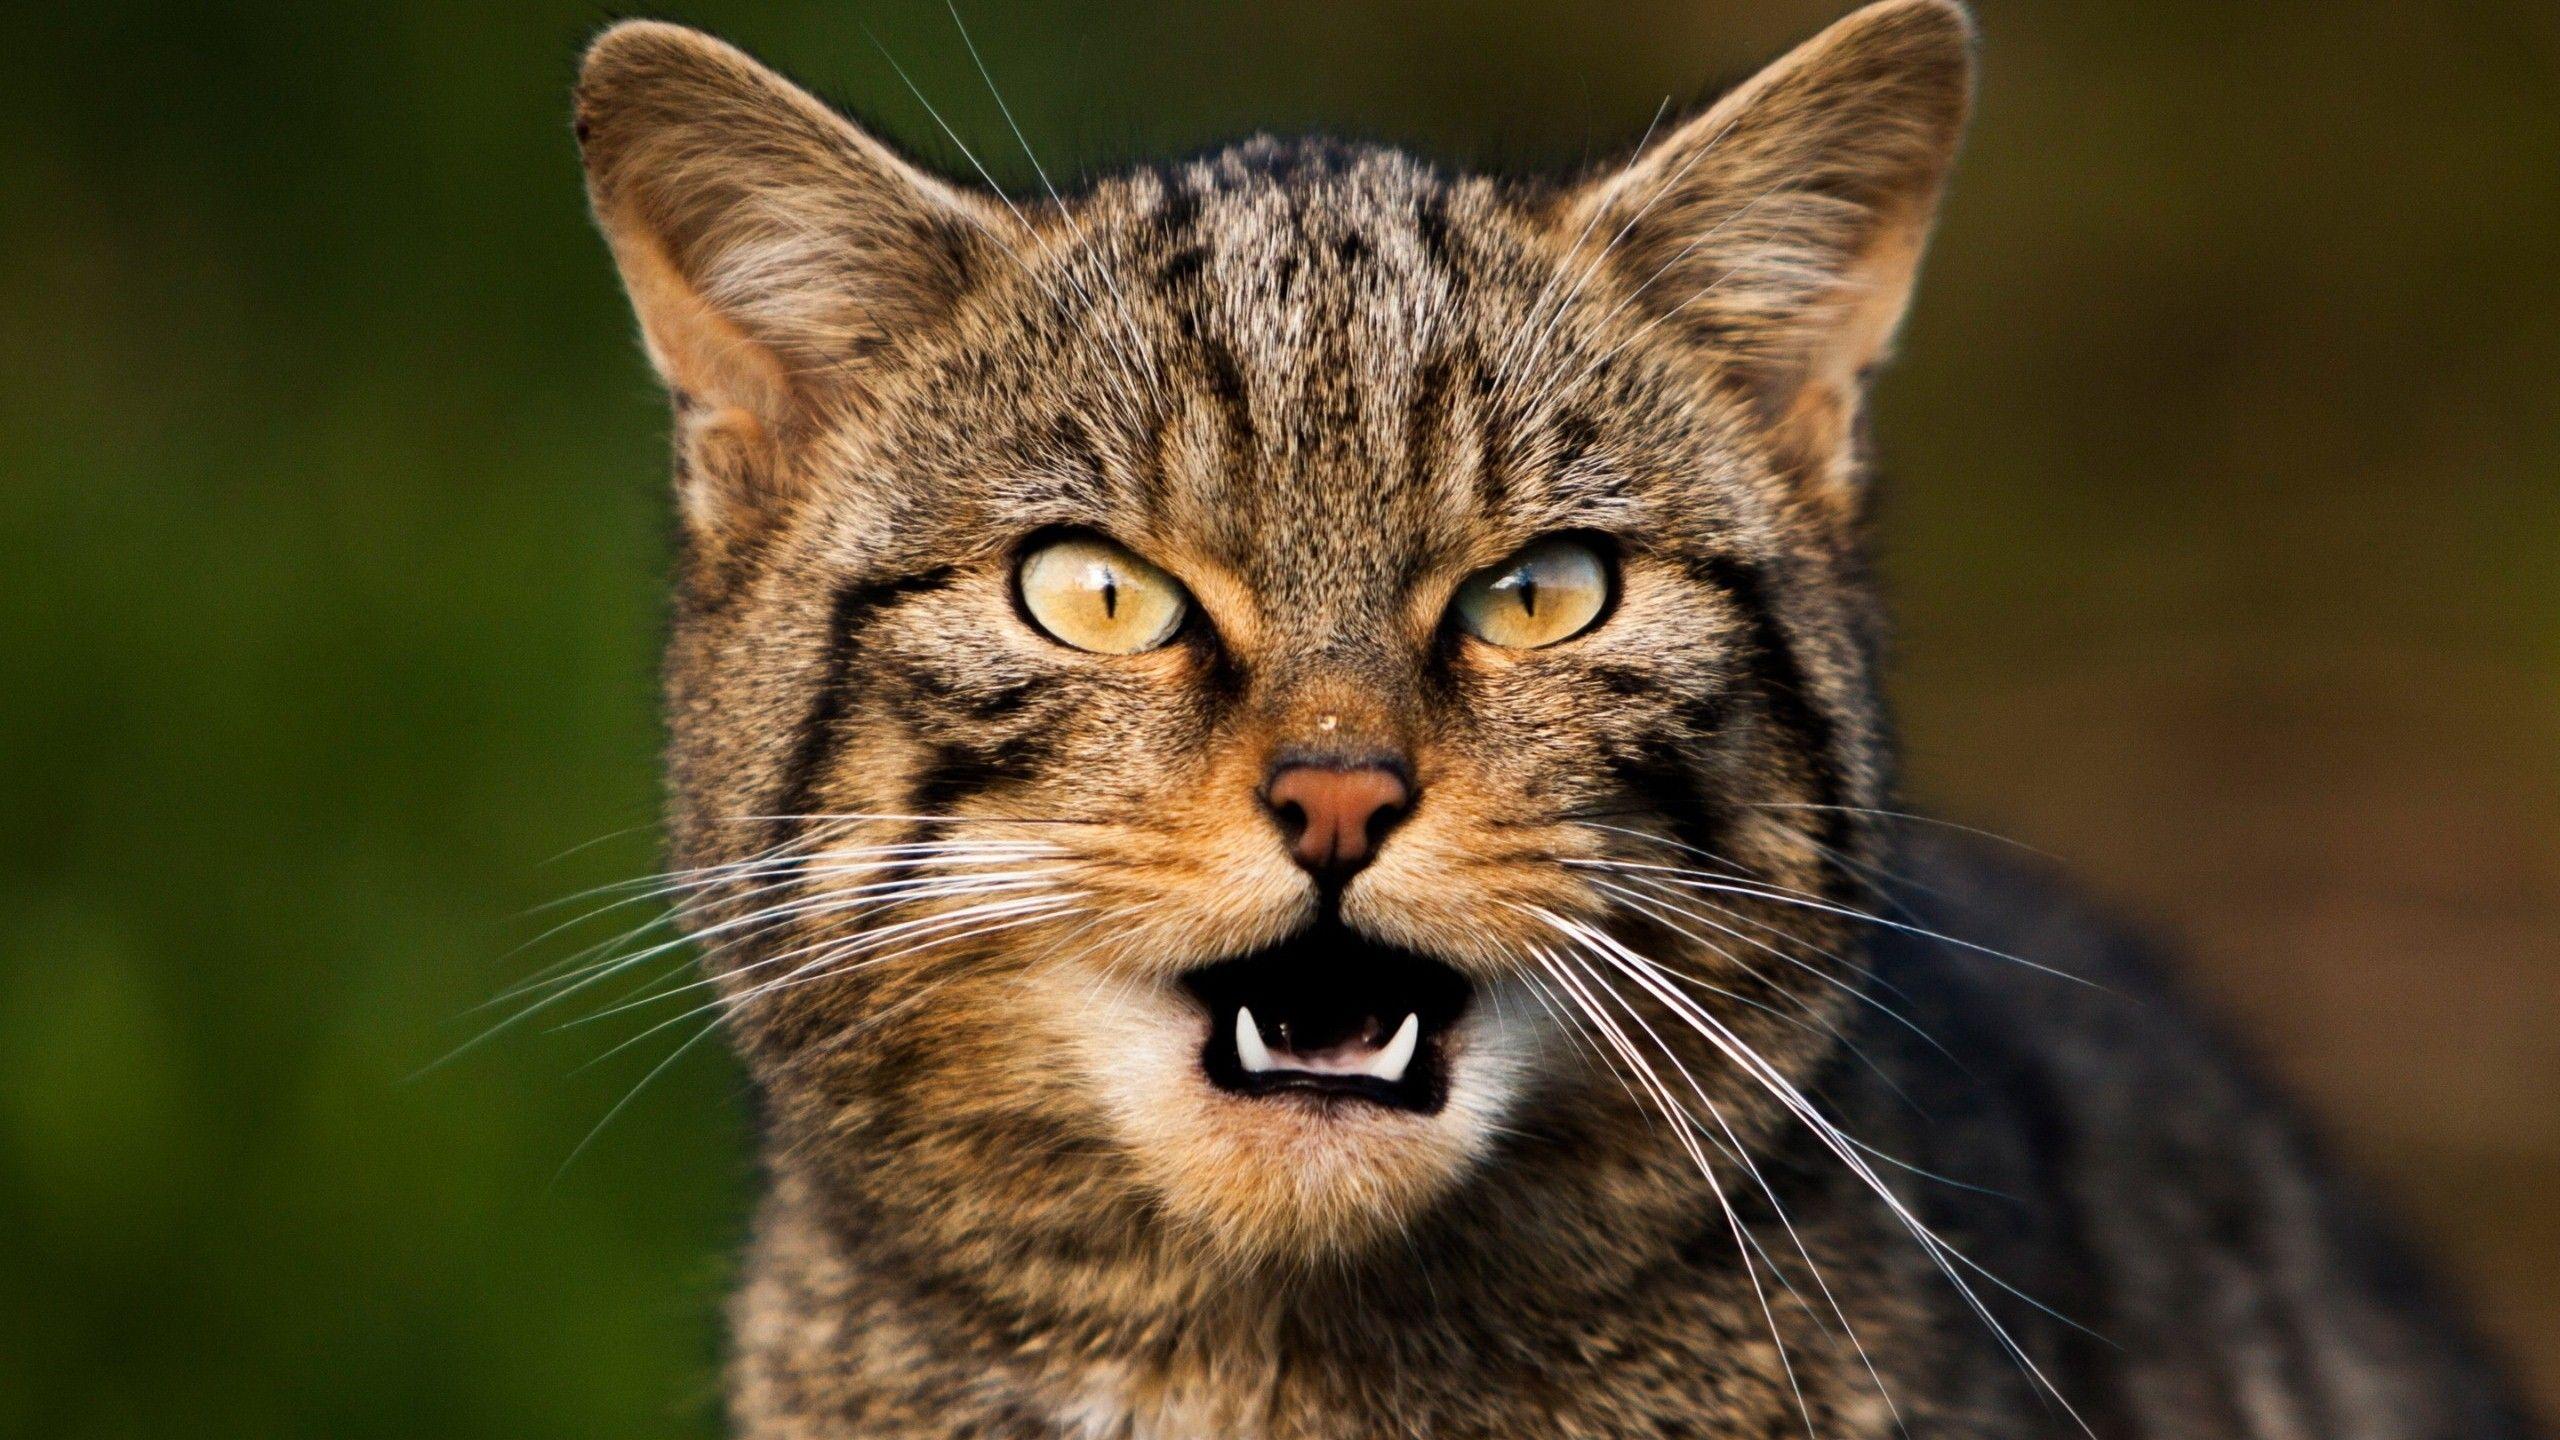 Angry Cat Desktop Wallpapers - Top Free Angry Cat Desktop Backgrounds